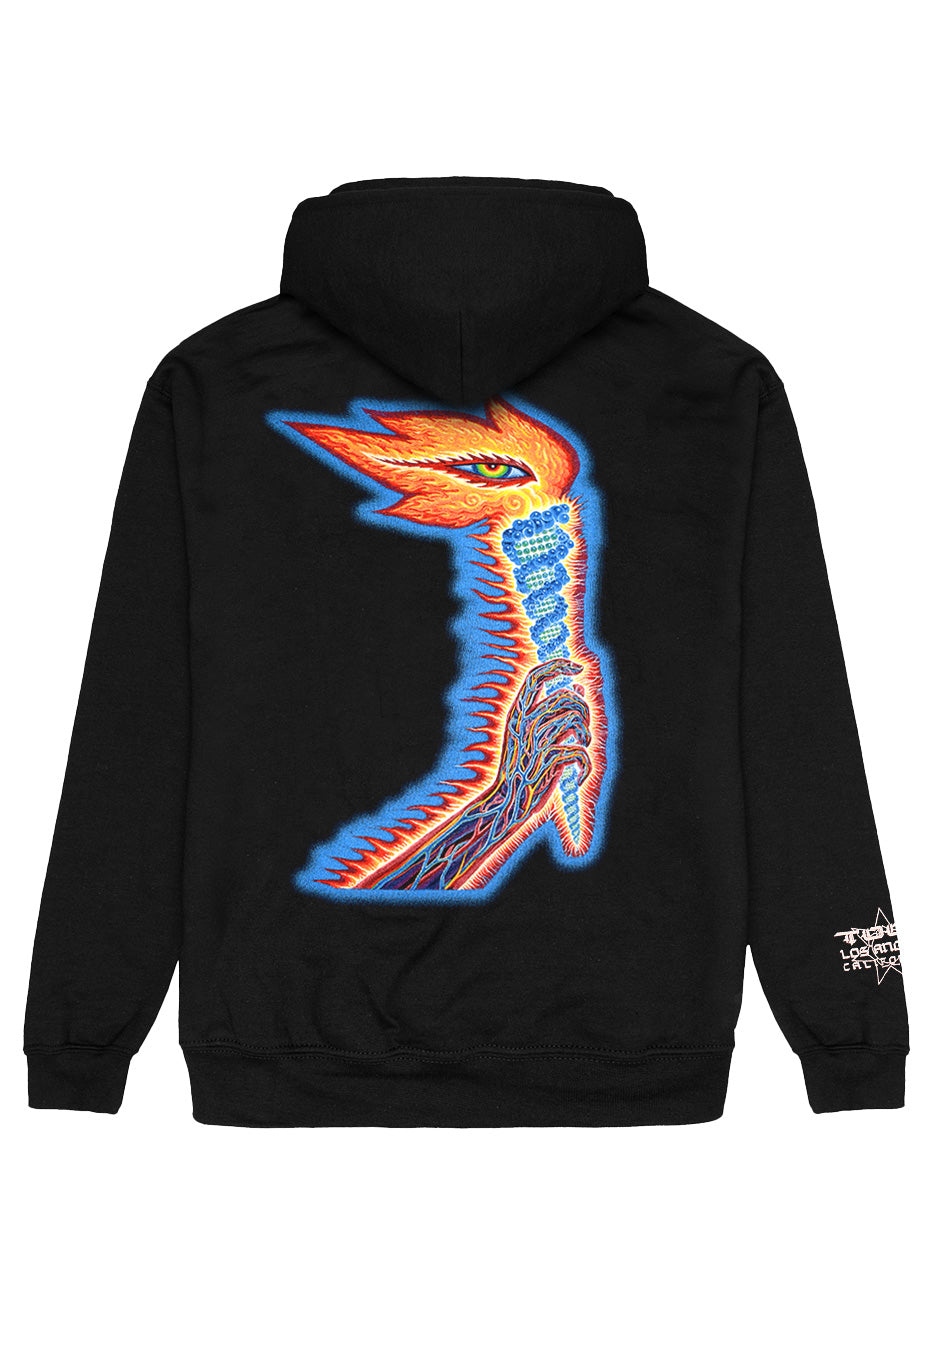 Tool - The Torch - Hoodie